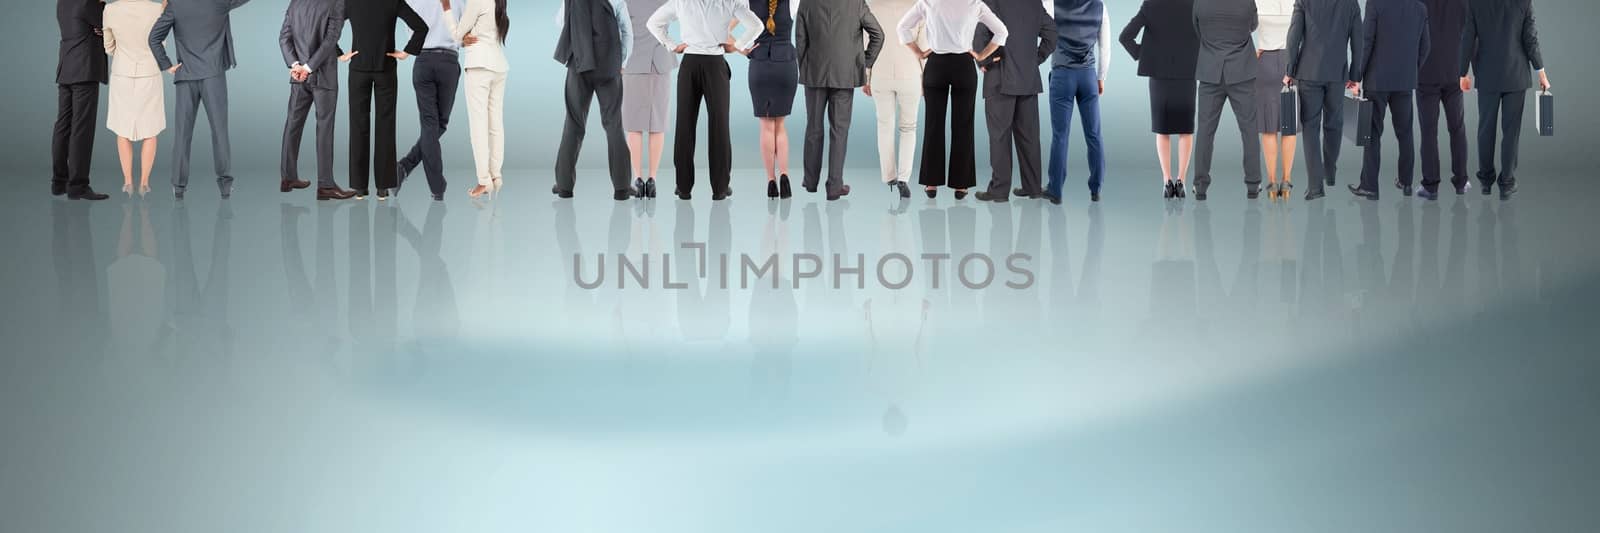 Digital composite of Group of Business People standing on reflective surface